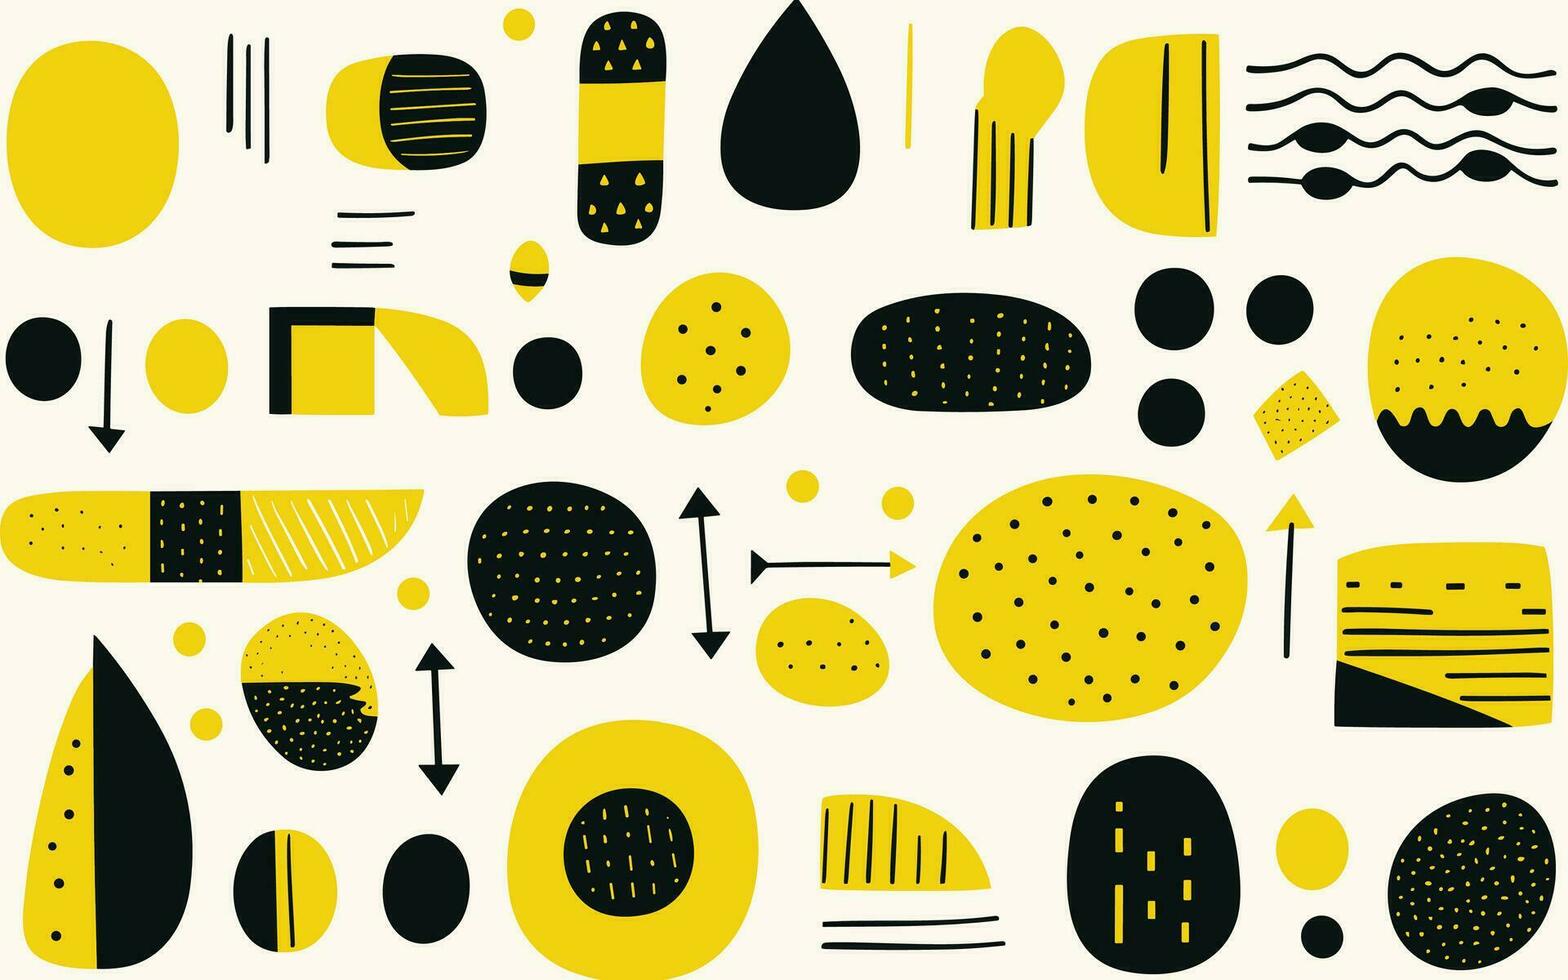 set of modern flat geometric shapes in yellow, in the style of stripes and shapes, bold black outlines, geometric shapes  patterns, white background, geometric vector